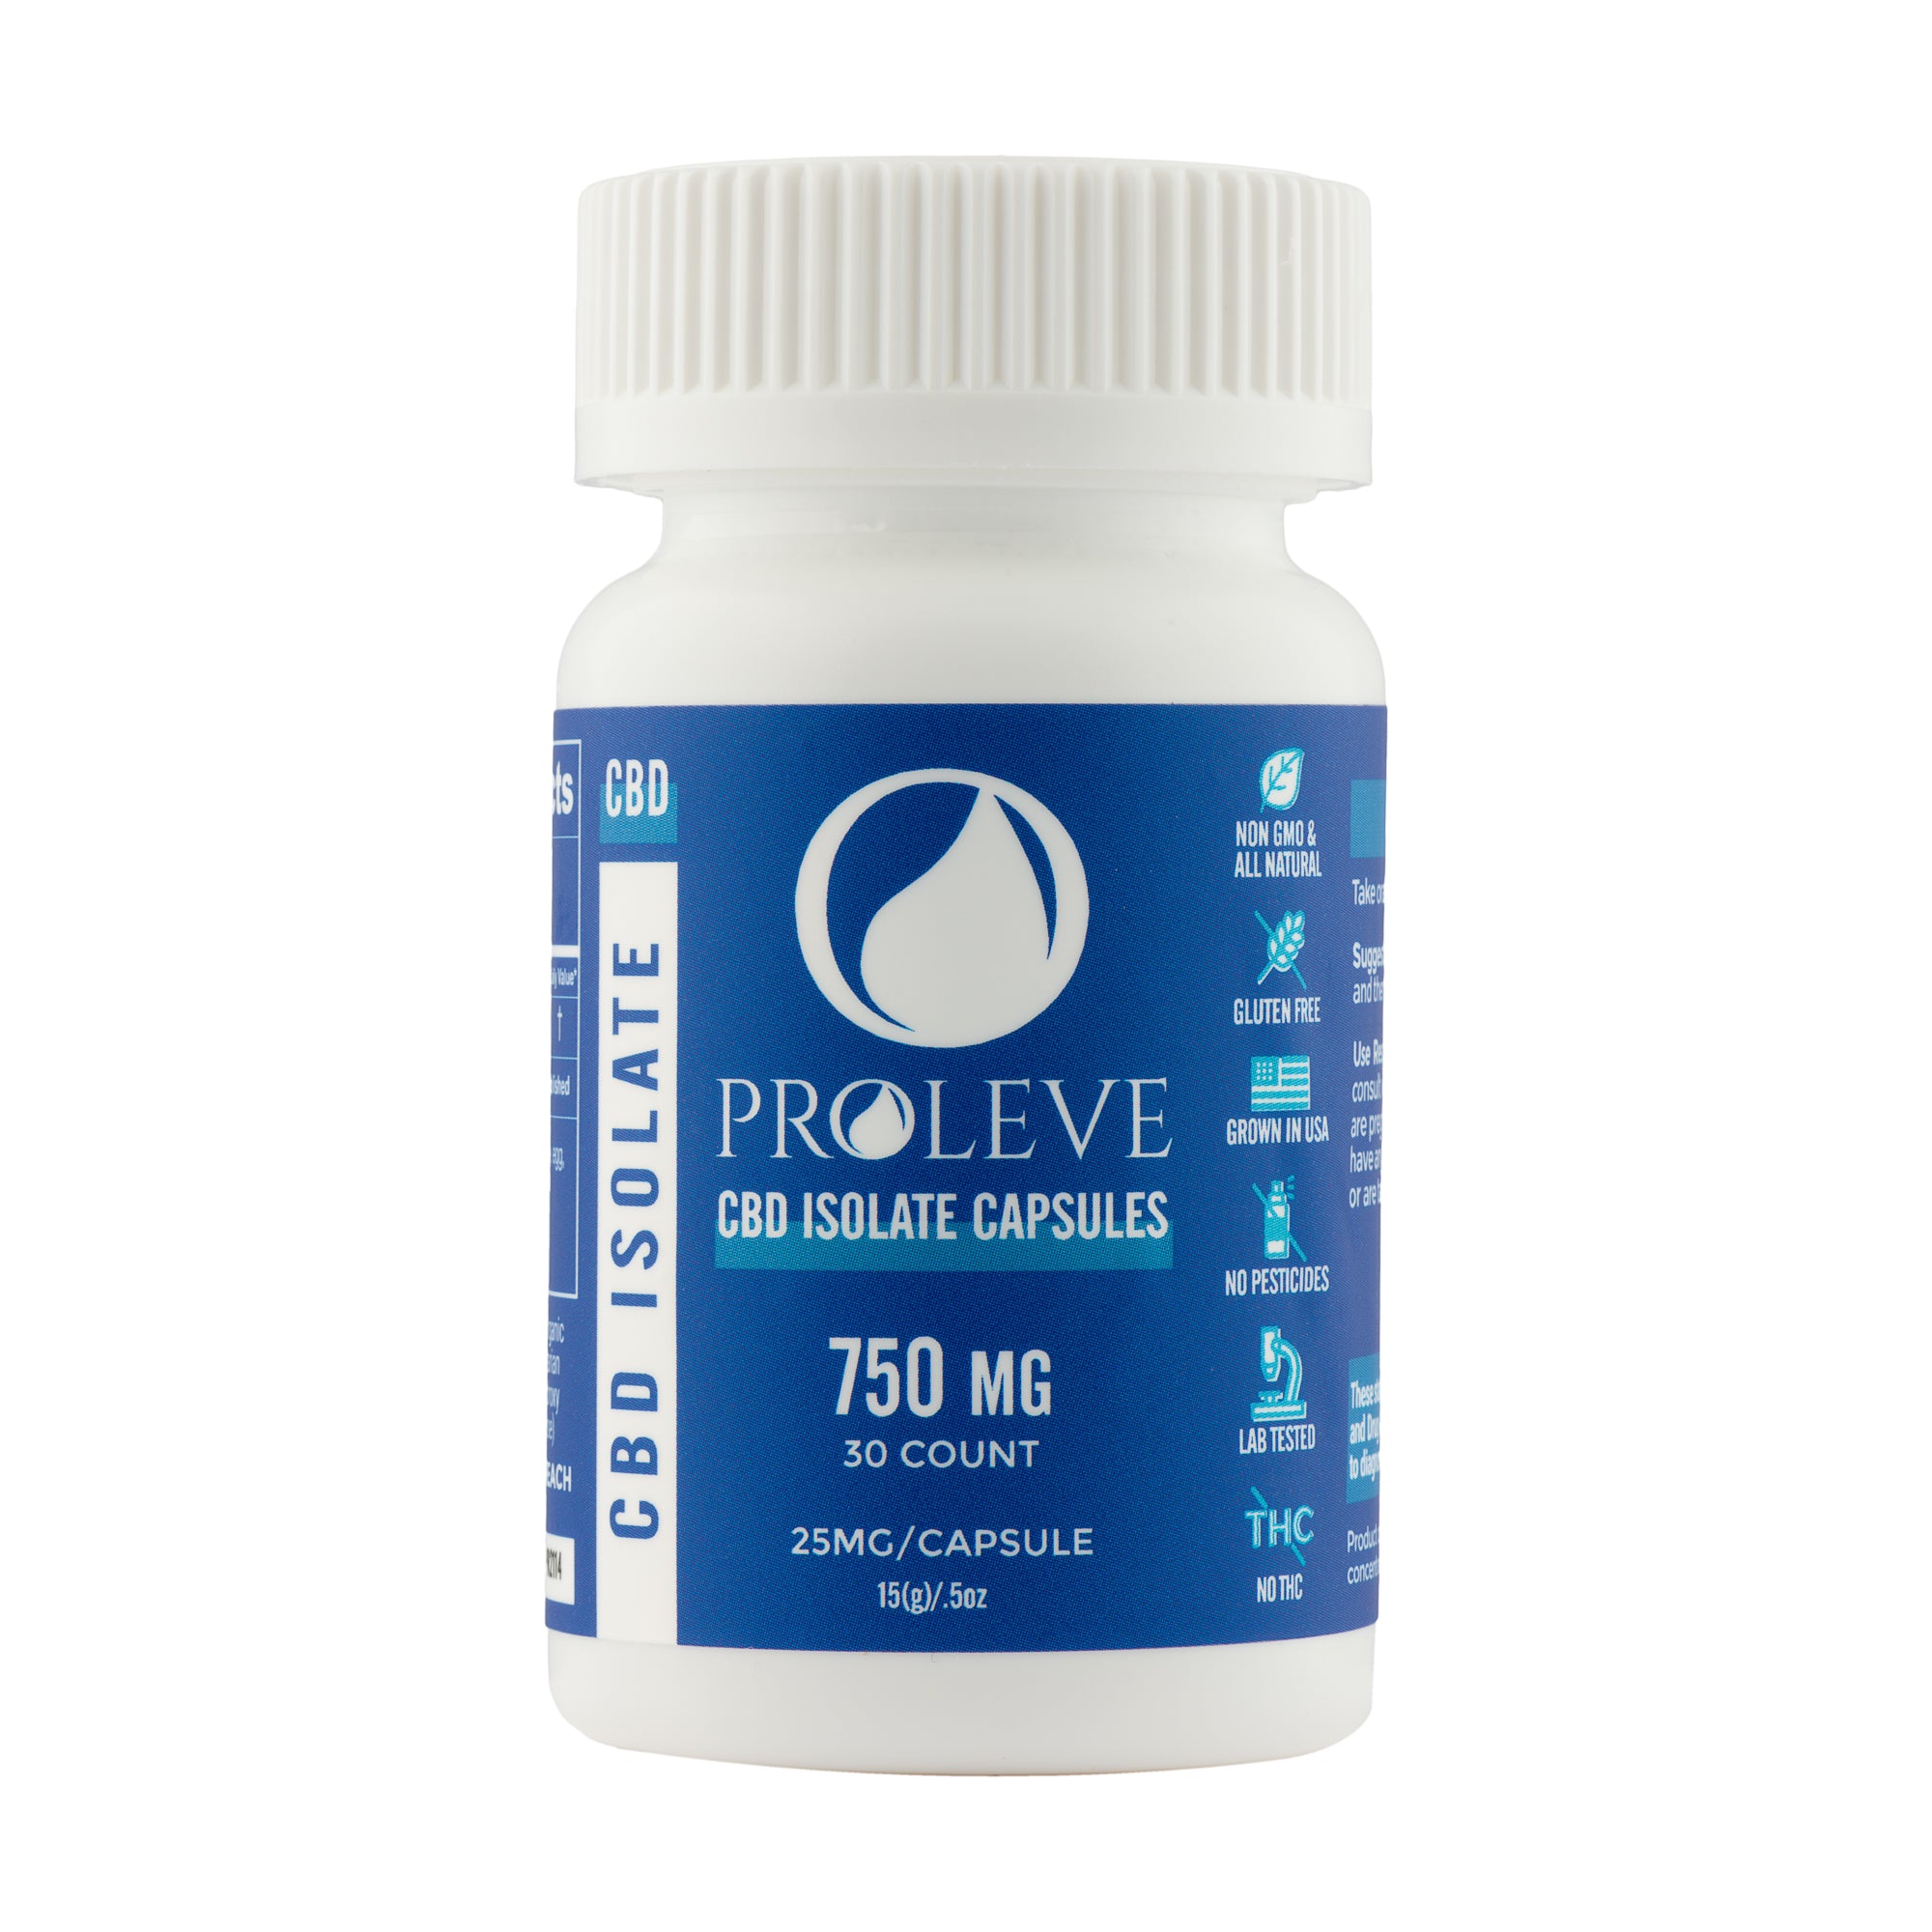 25mg Isolate Capsules 30 count